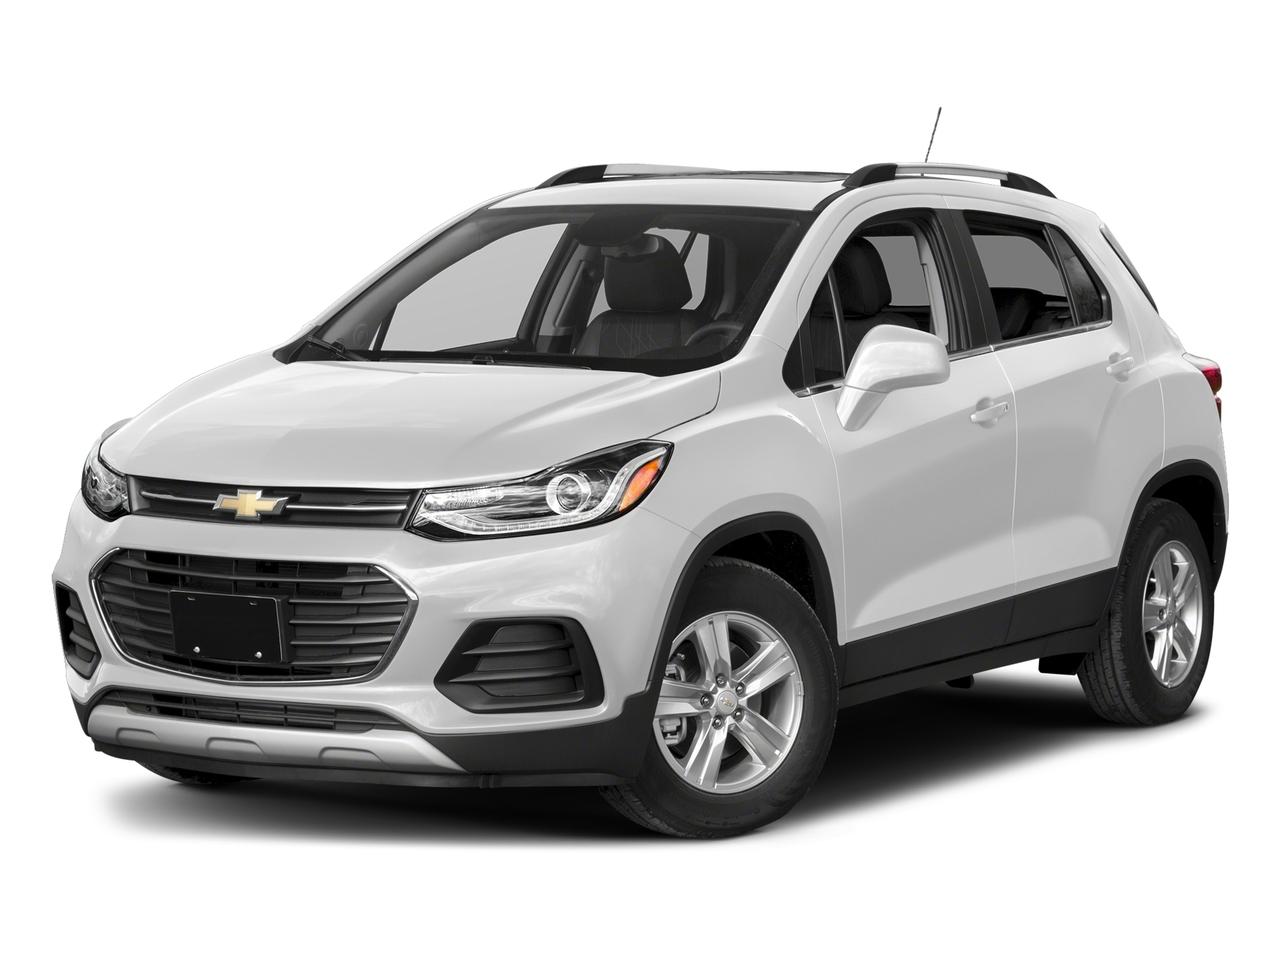 2018 Chevrolet Trax Vehicle Photo in Plainfield, IL 60586